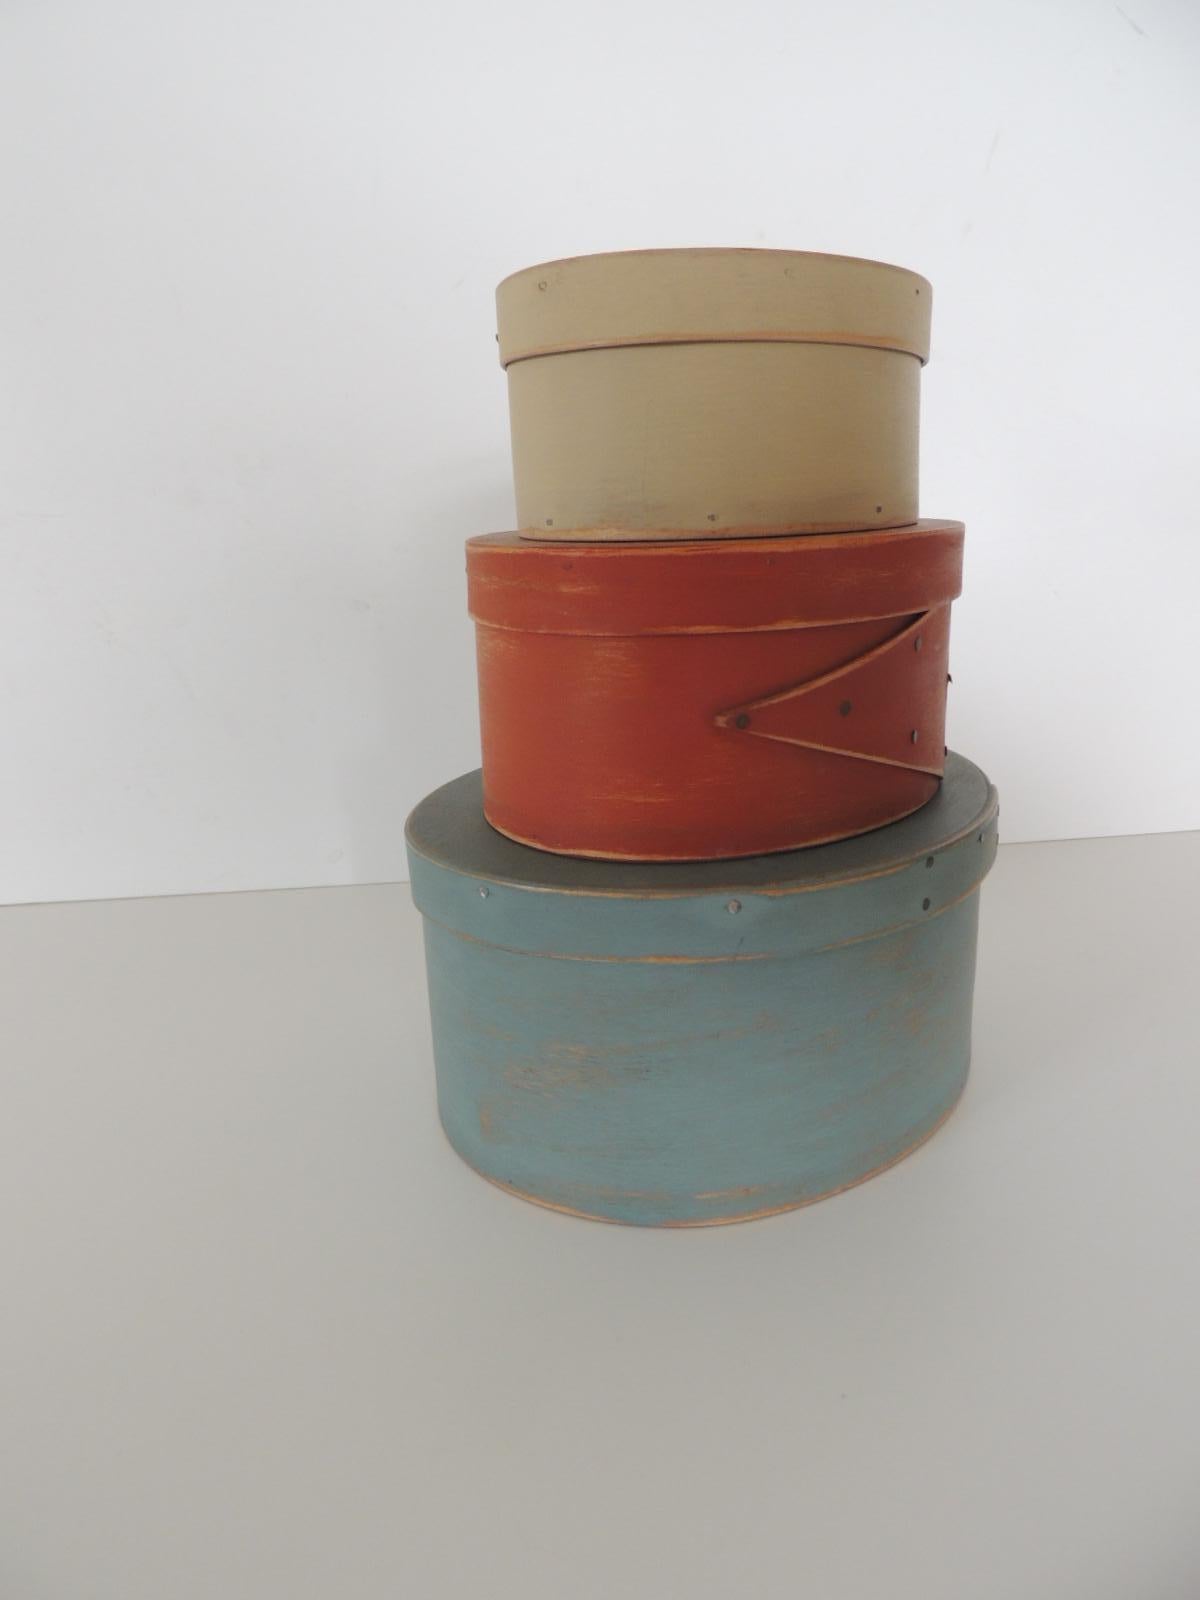 Set of 3 red, blue and tan wooden shaker boxes.
Three lidded oval hand painted storage boxes/caddies.
Sizes: from top.
5 .1/4